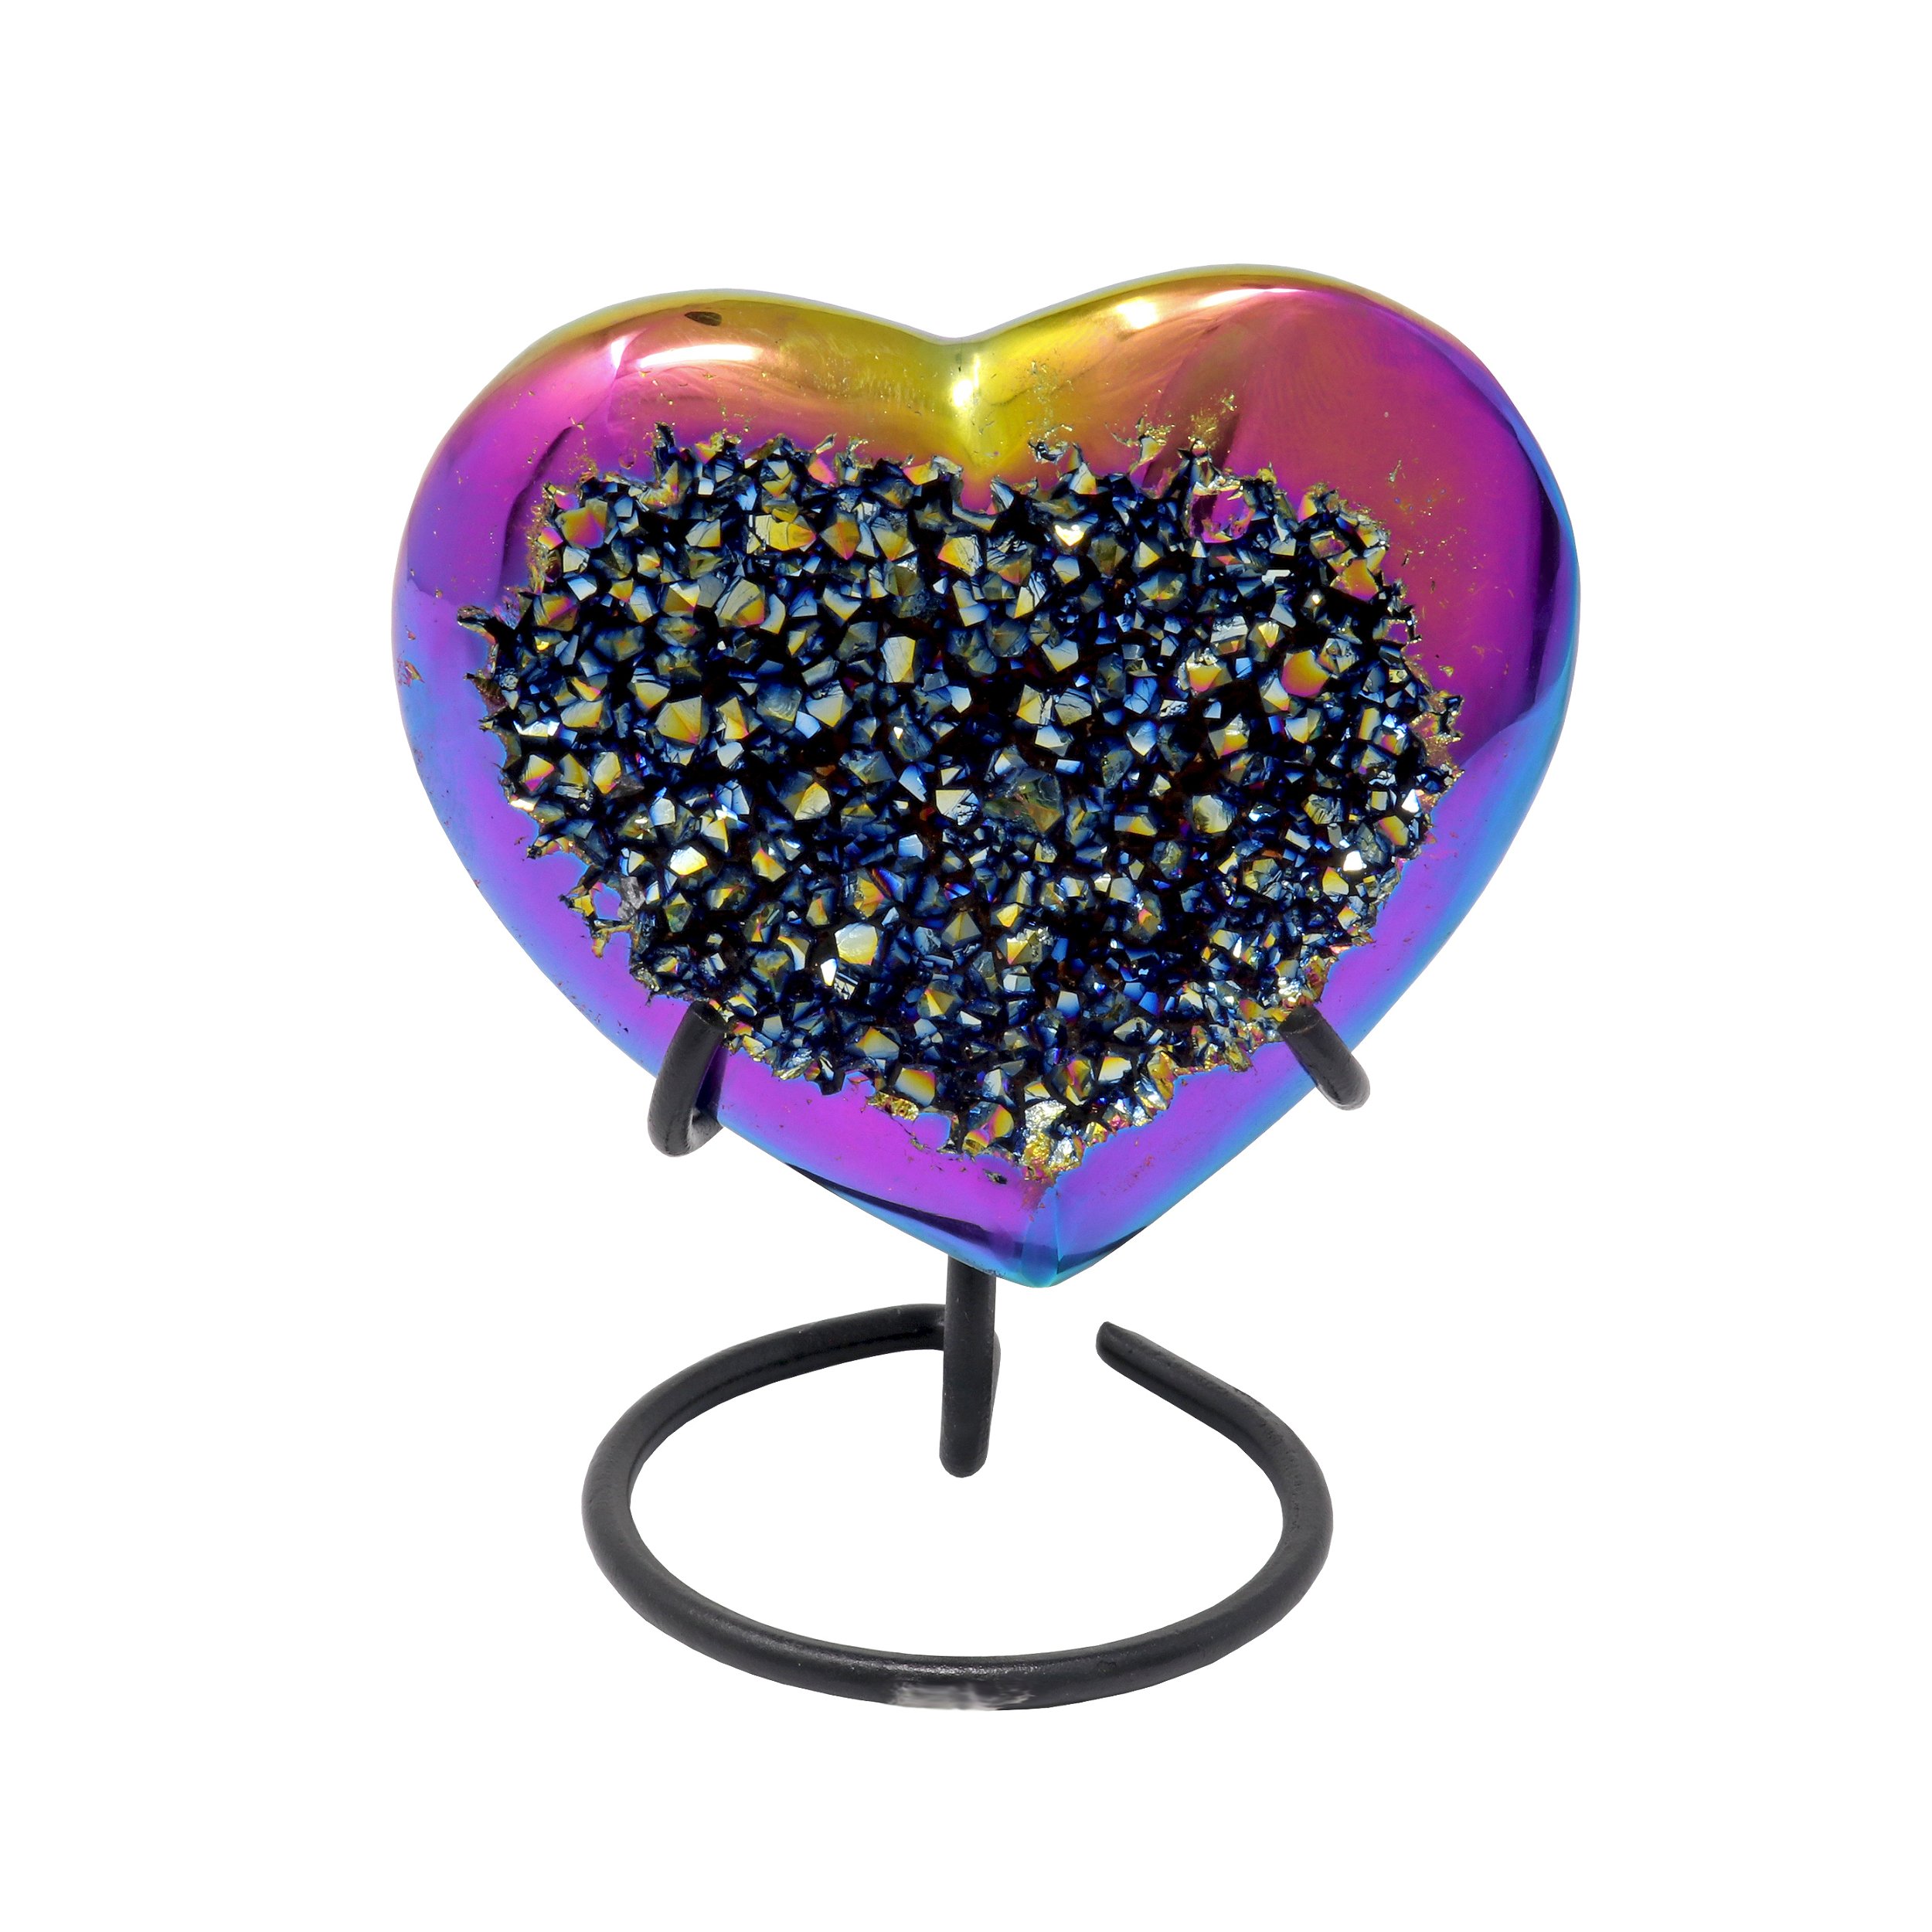 Rainbow Titanium Druze Geode Heart On Fitted Spiral Stand - Flat Druze Face With Medium Sized Crystals